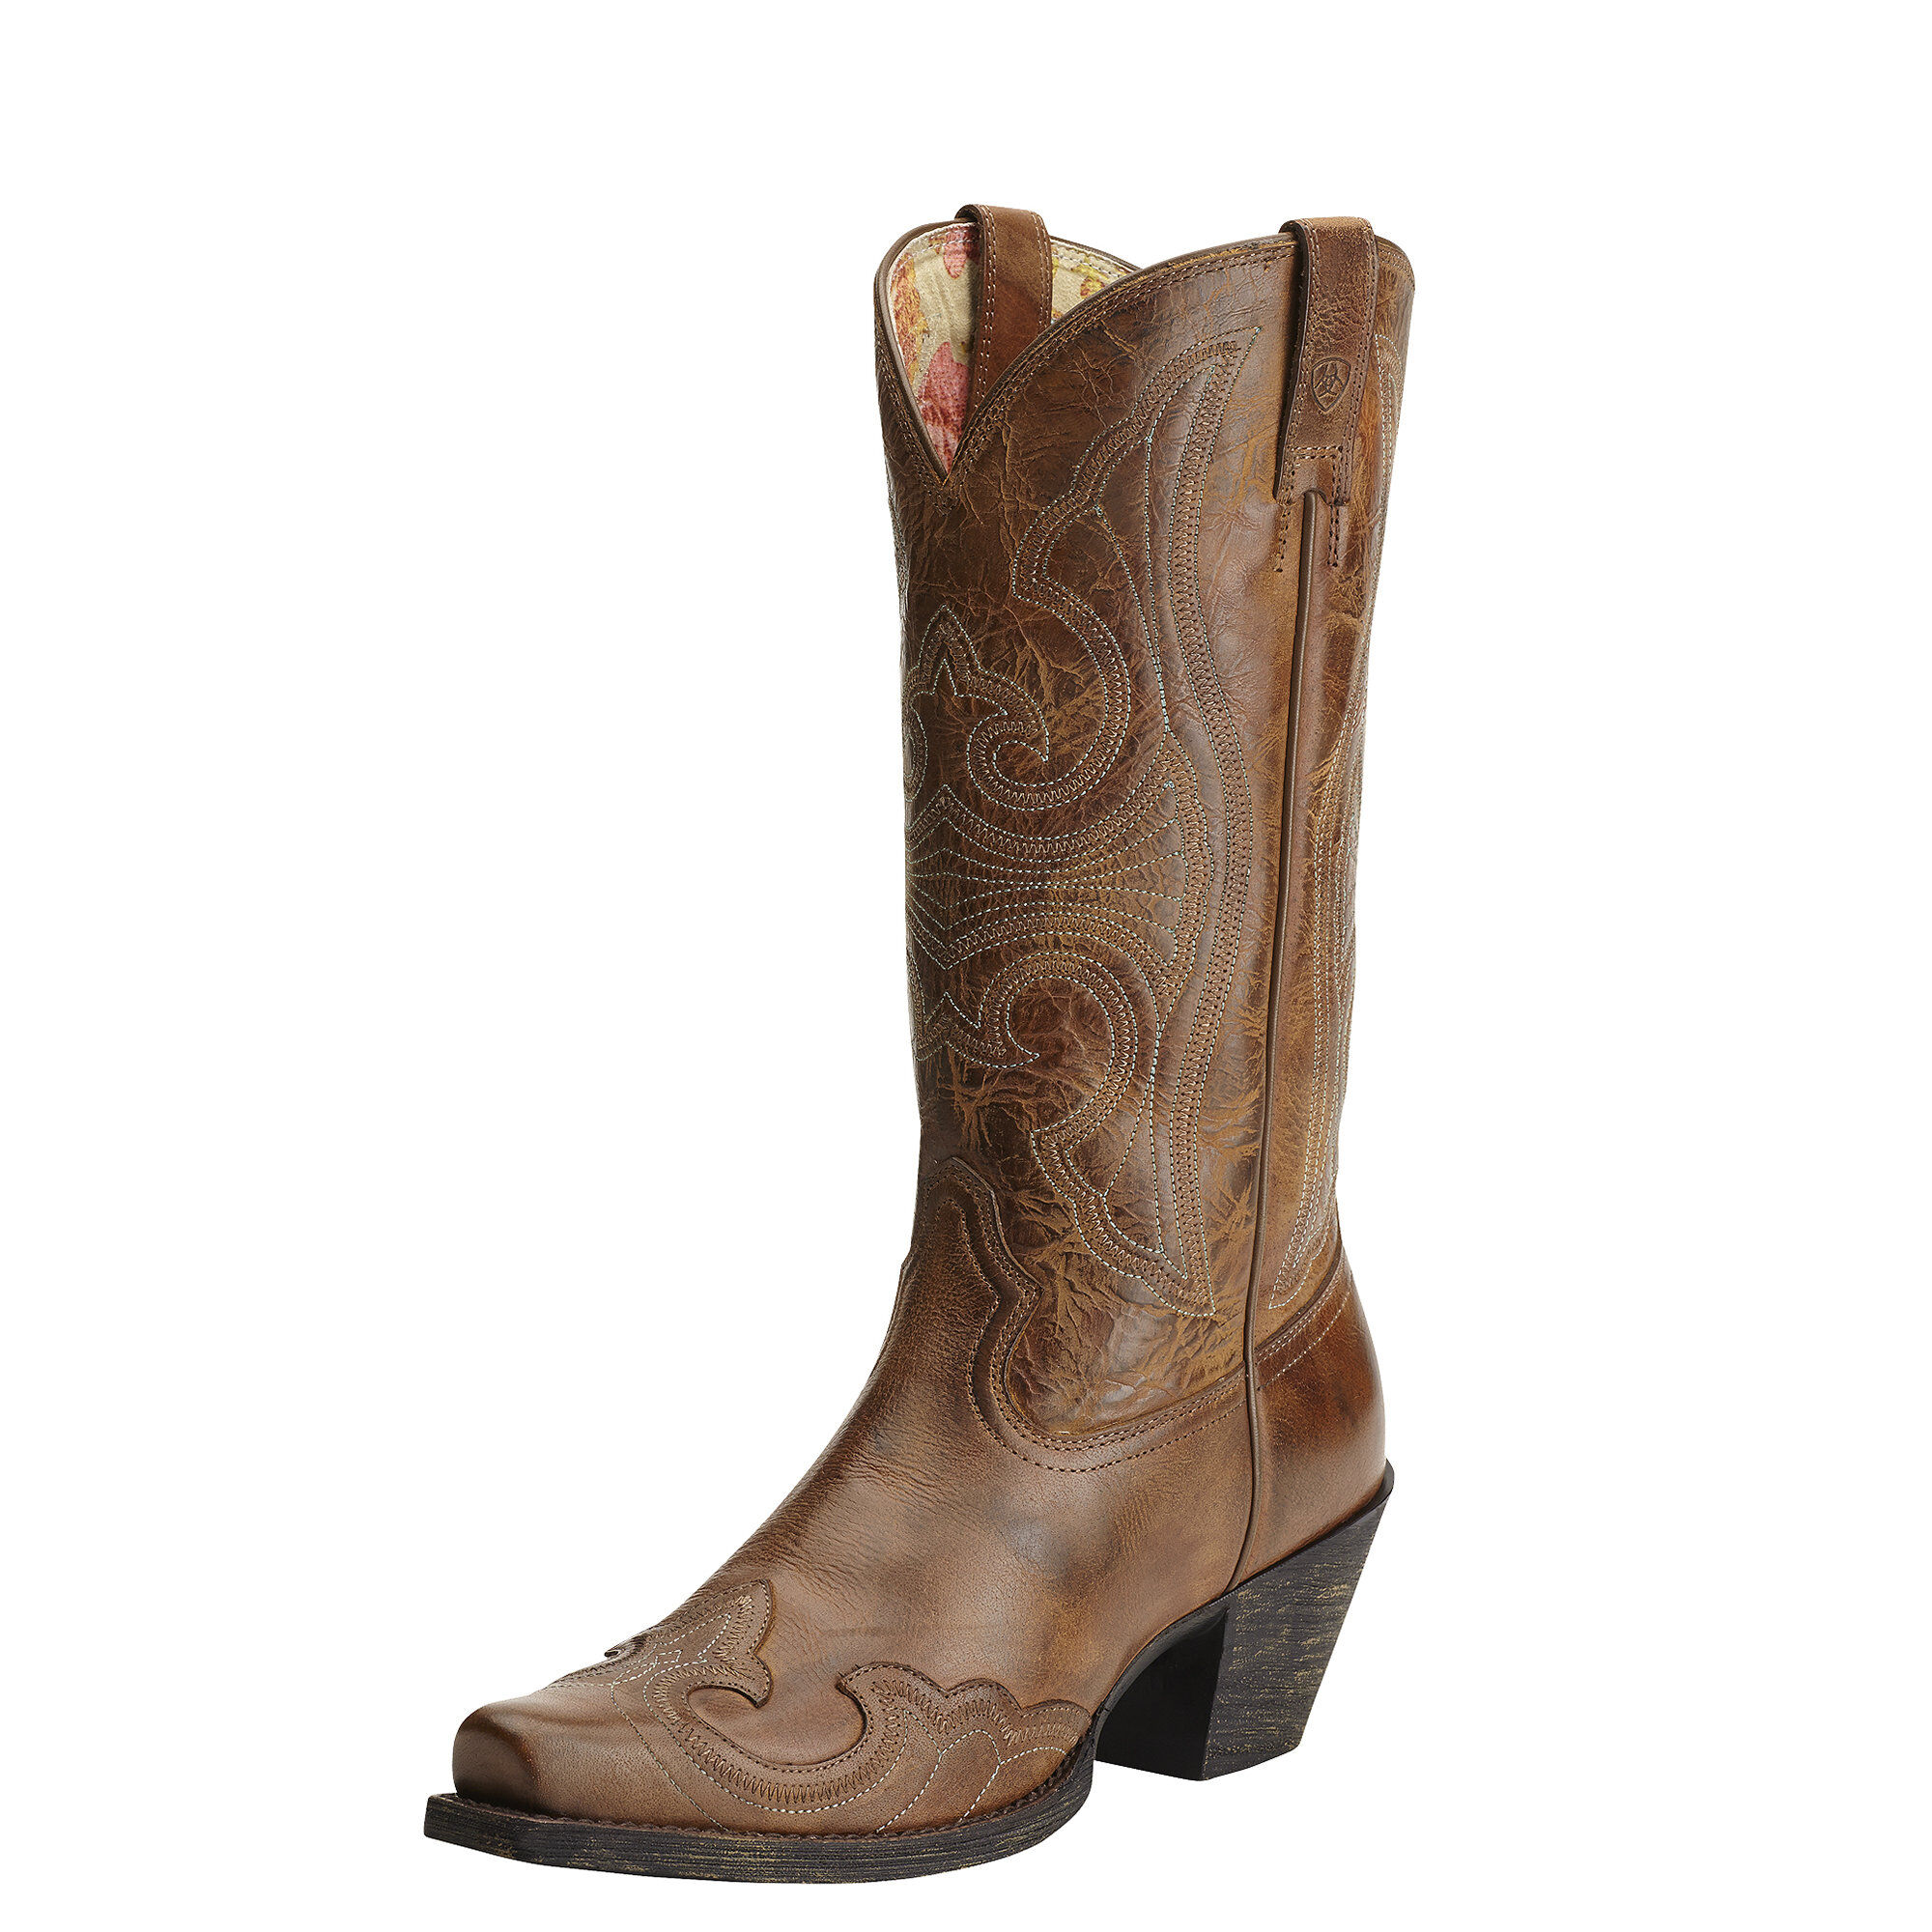 Women's Round Up D Toe Wingtip Western Boots in Sandstorm Leather  by Ariat